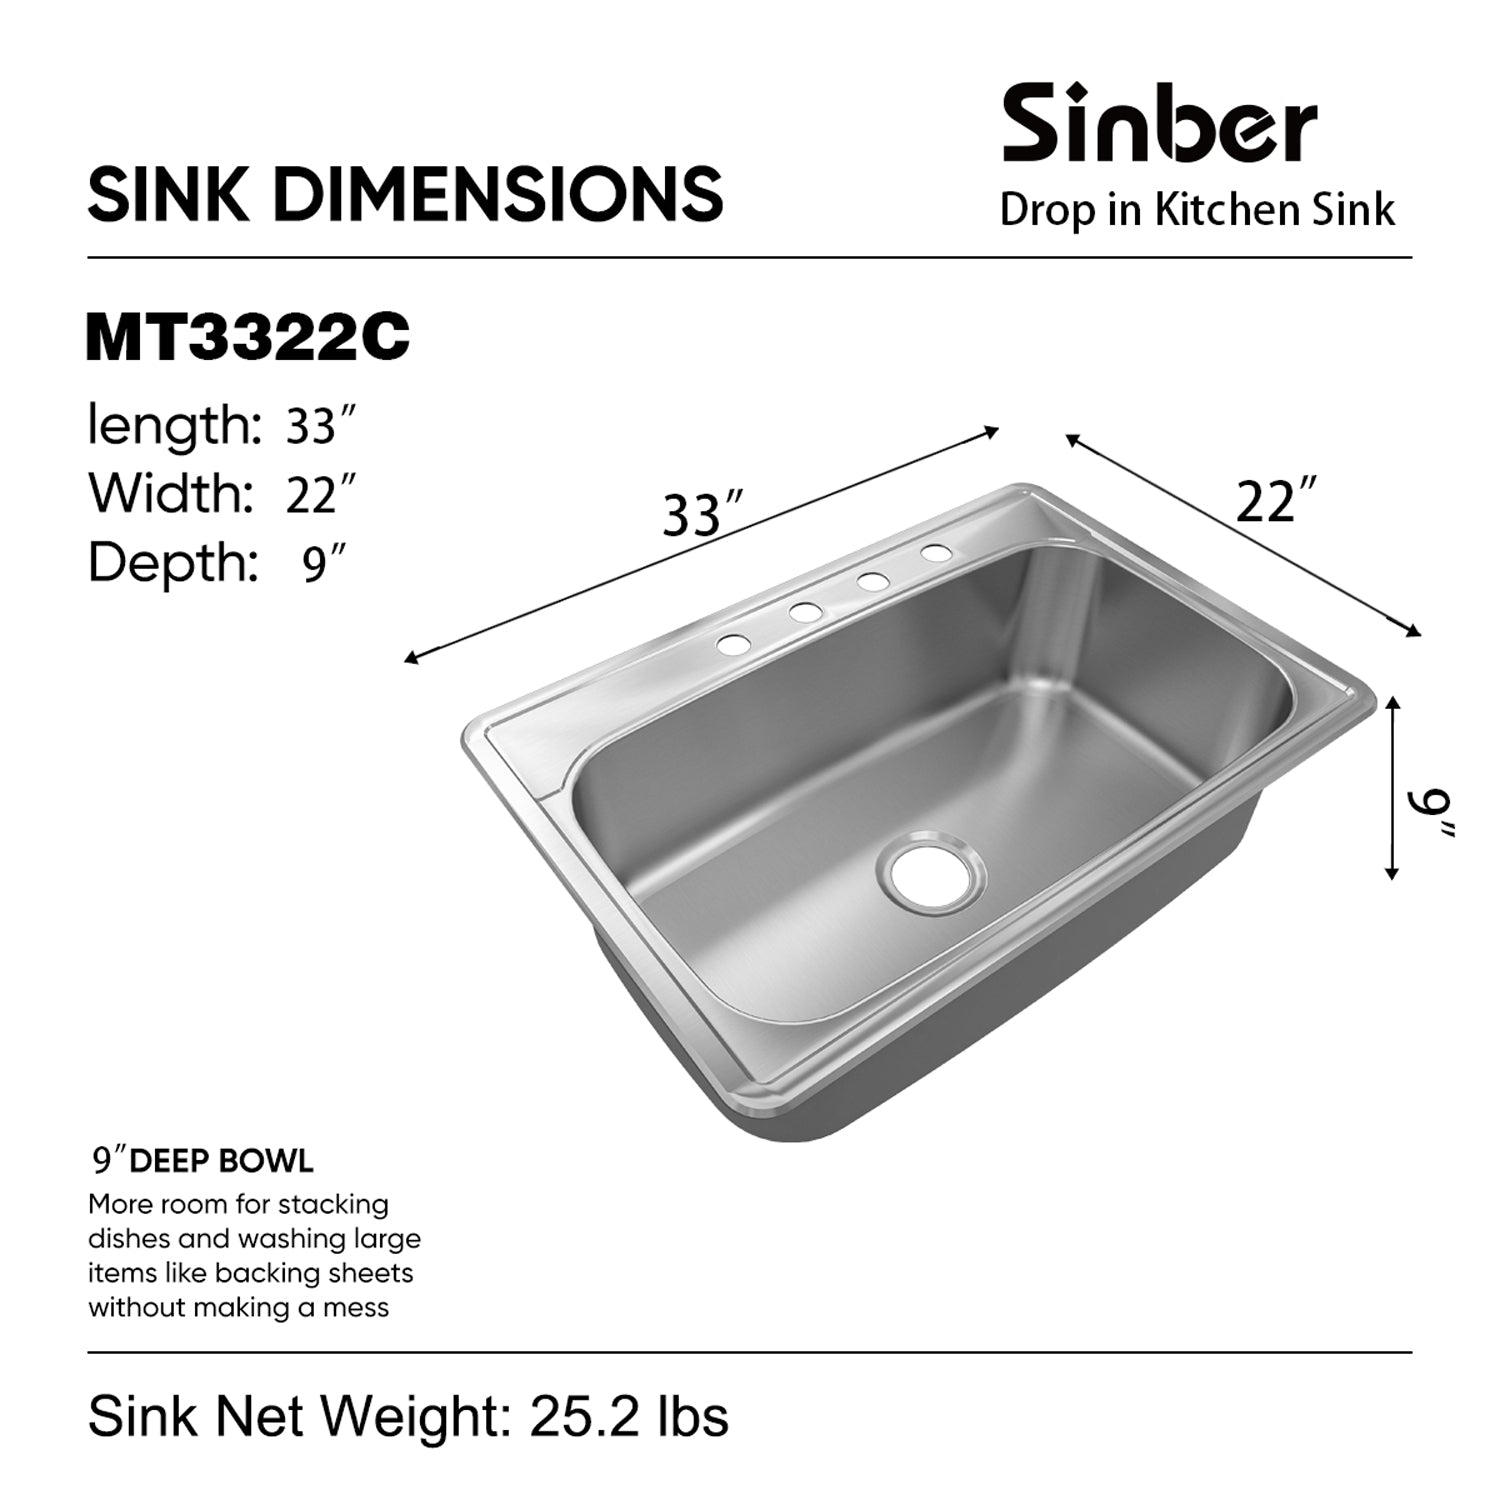 Sinber 33" x 22" x 9" Drop In Single Bowl Kitchen Sink with 18 Gauge 304 Stainless Steel Satin Finish MT3322C (Sink Only)